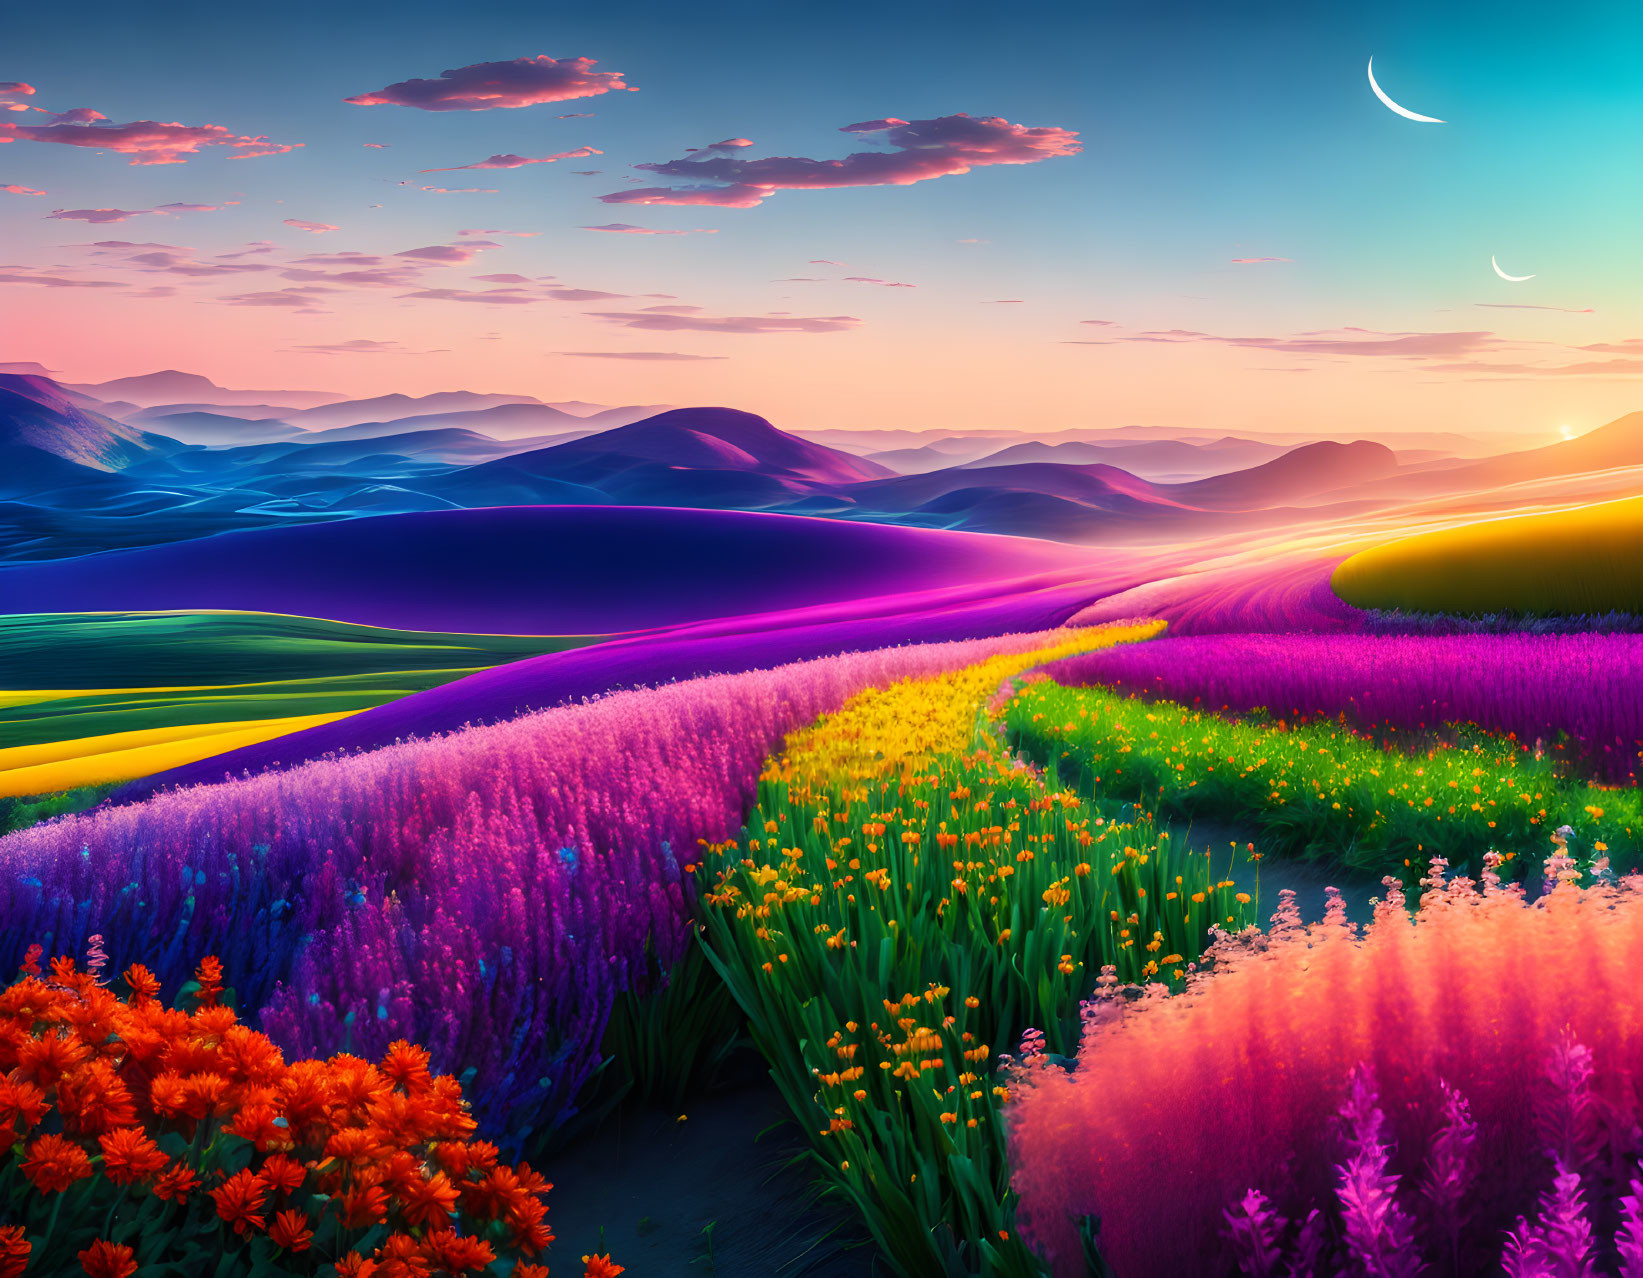 Fields of Color